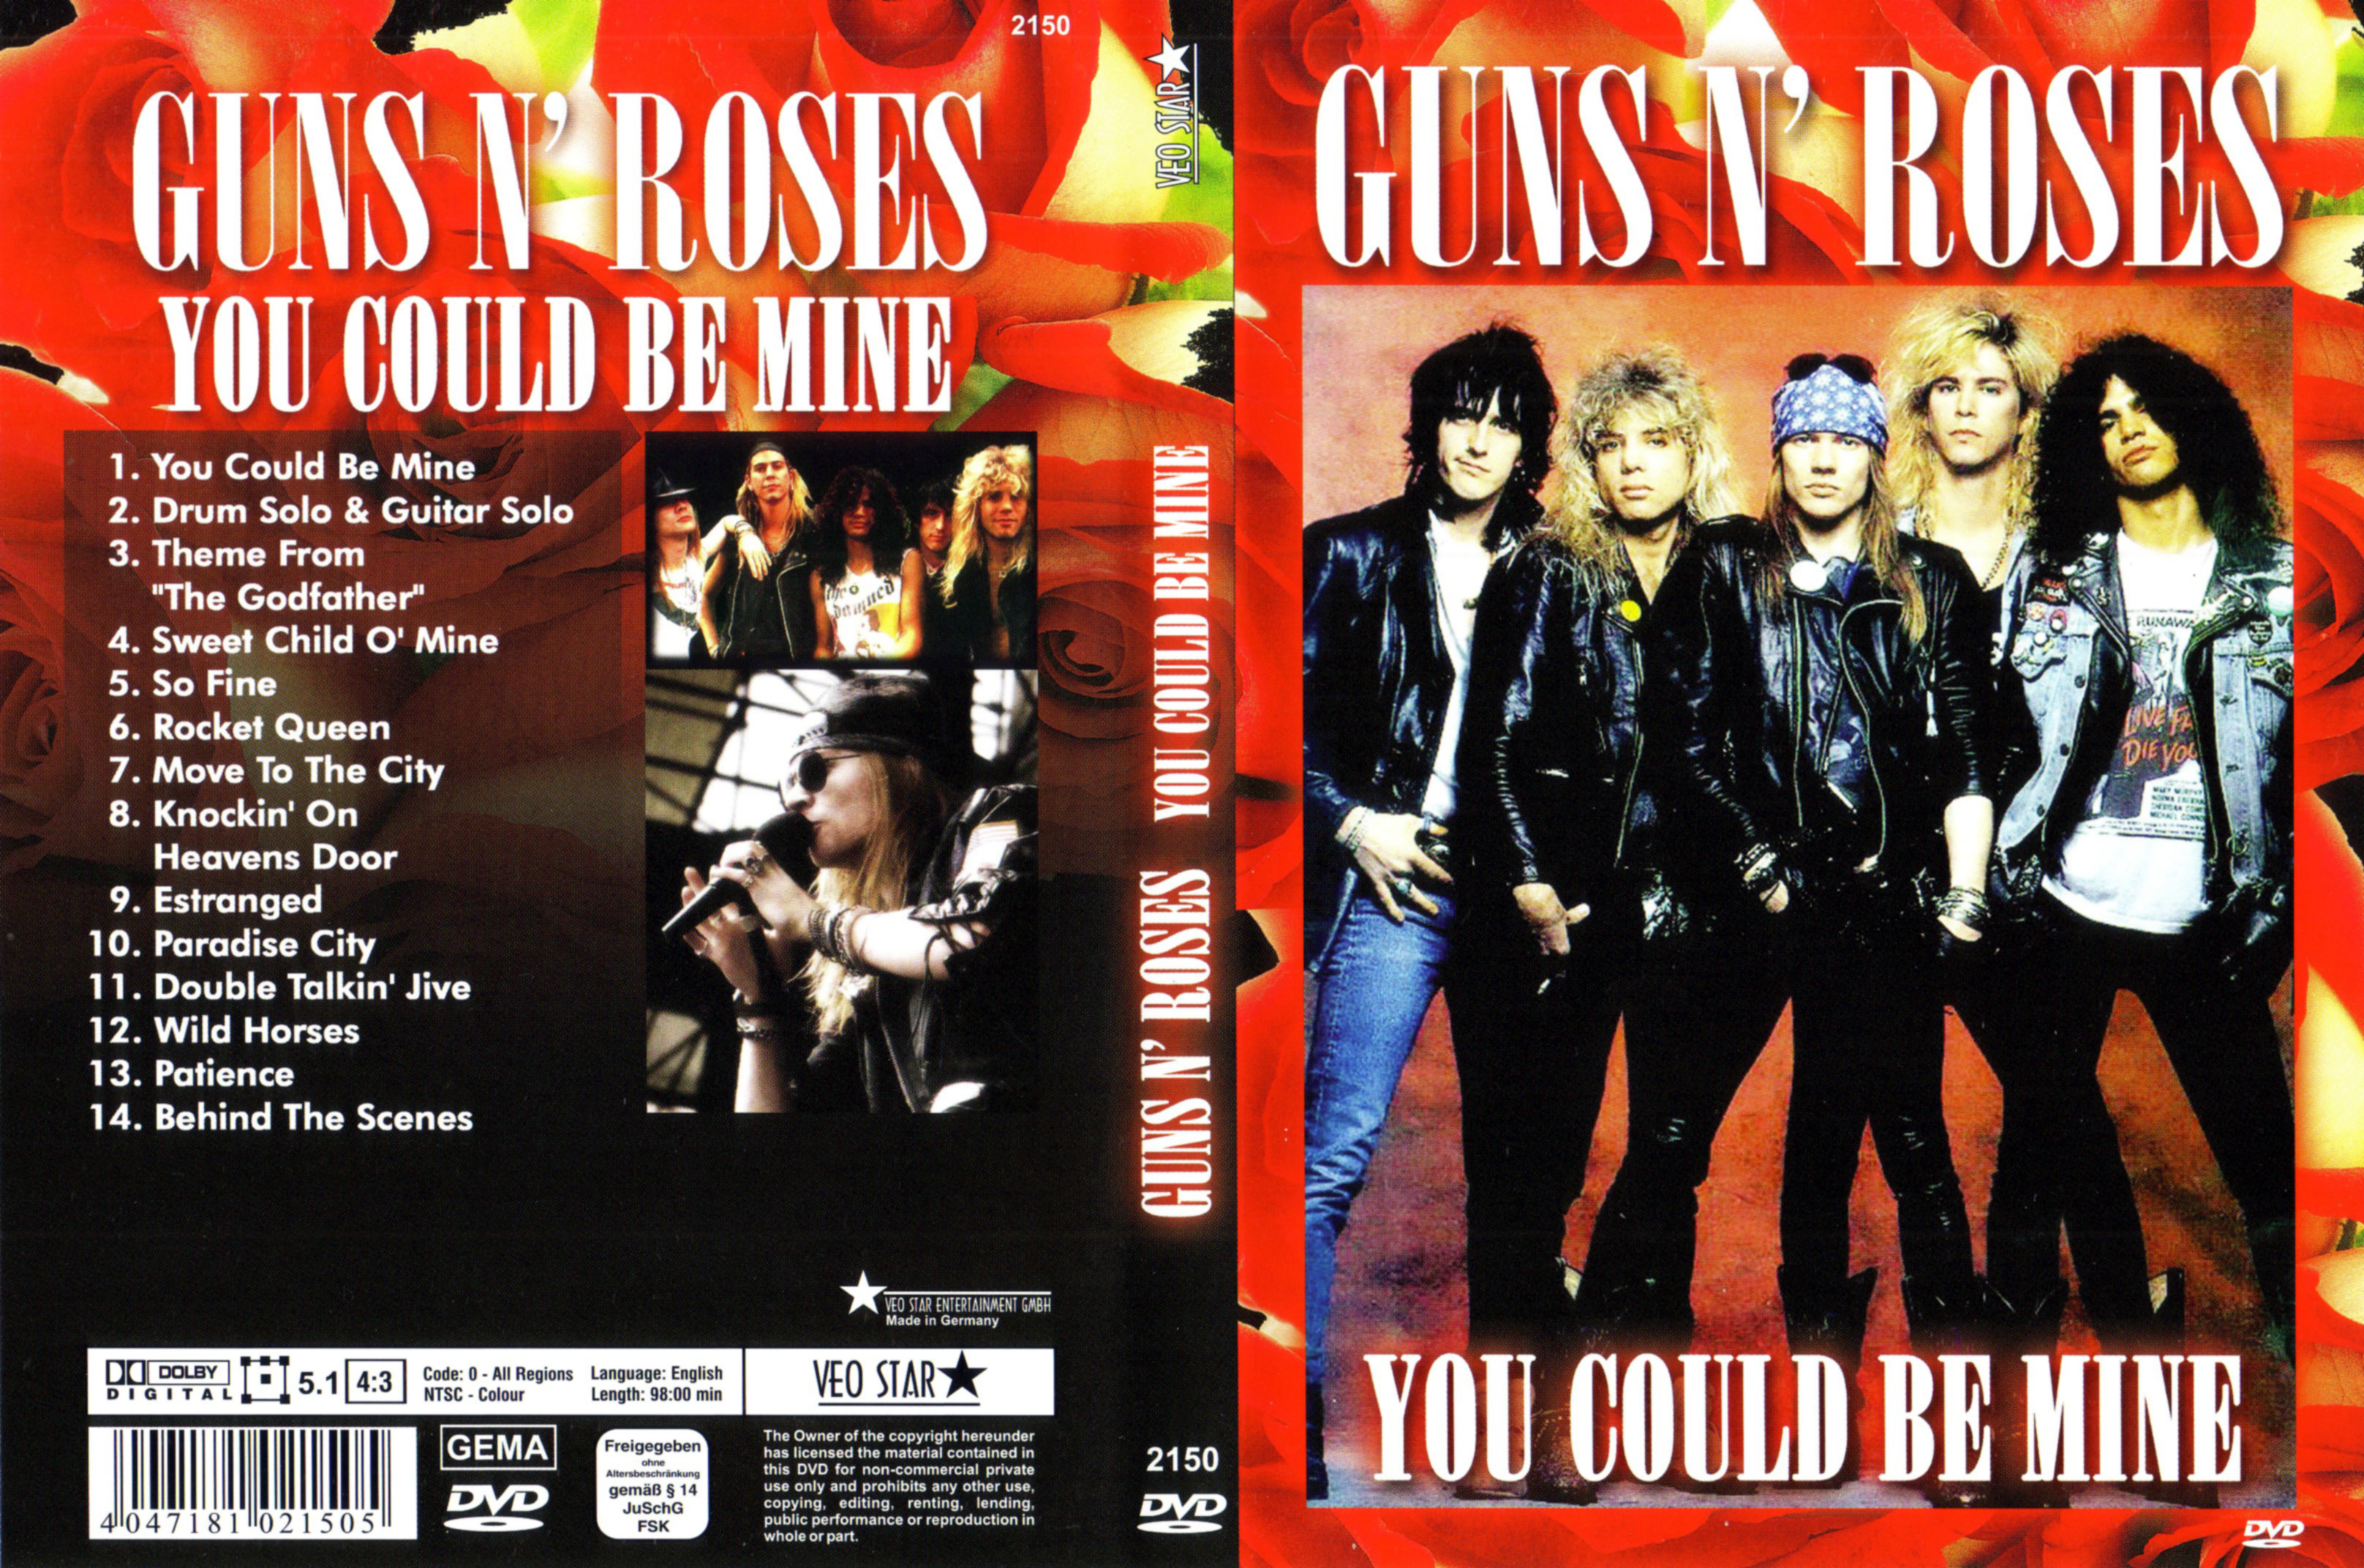 Jaquette DVD Guns n roses - You could be mine